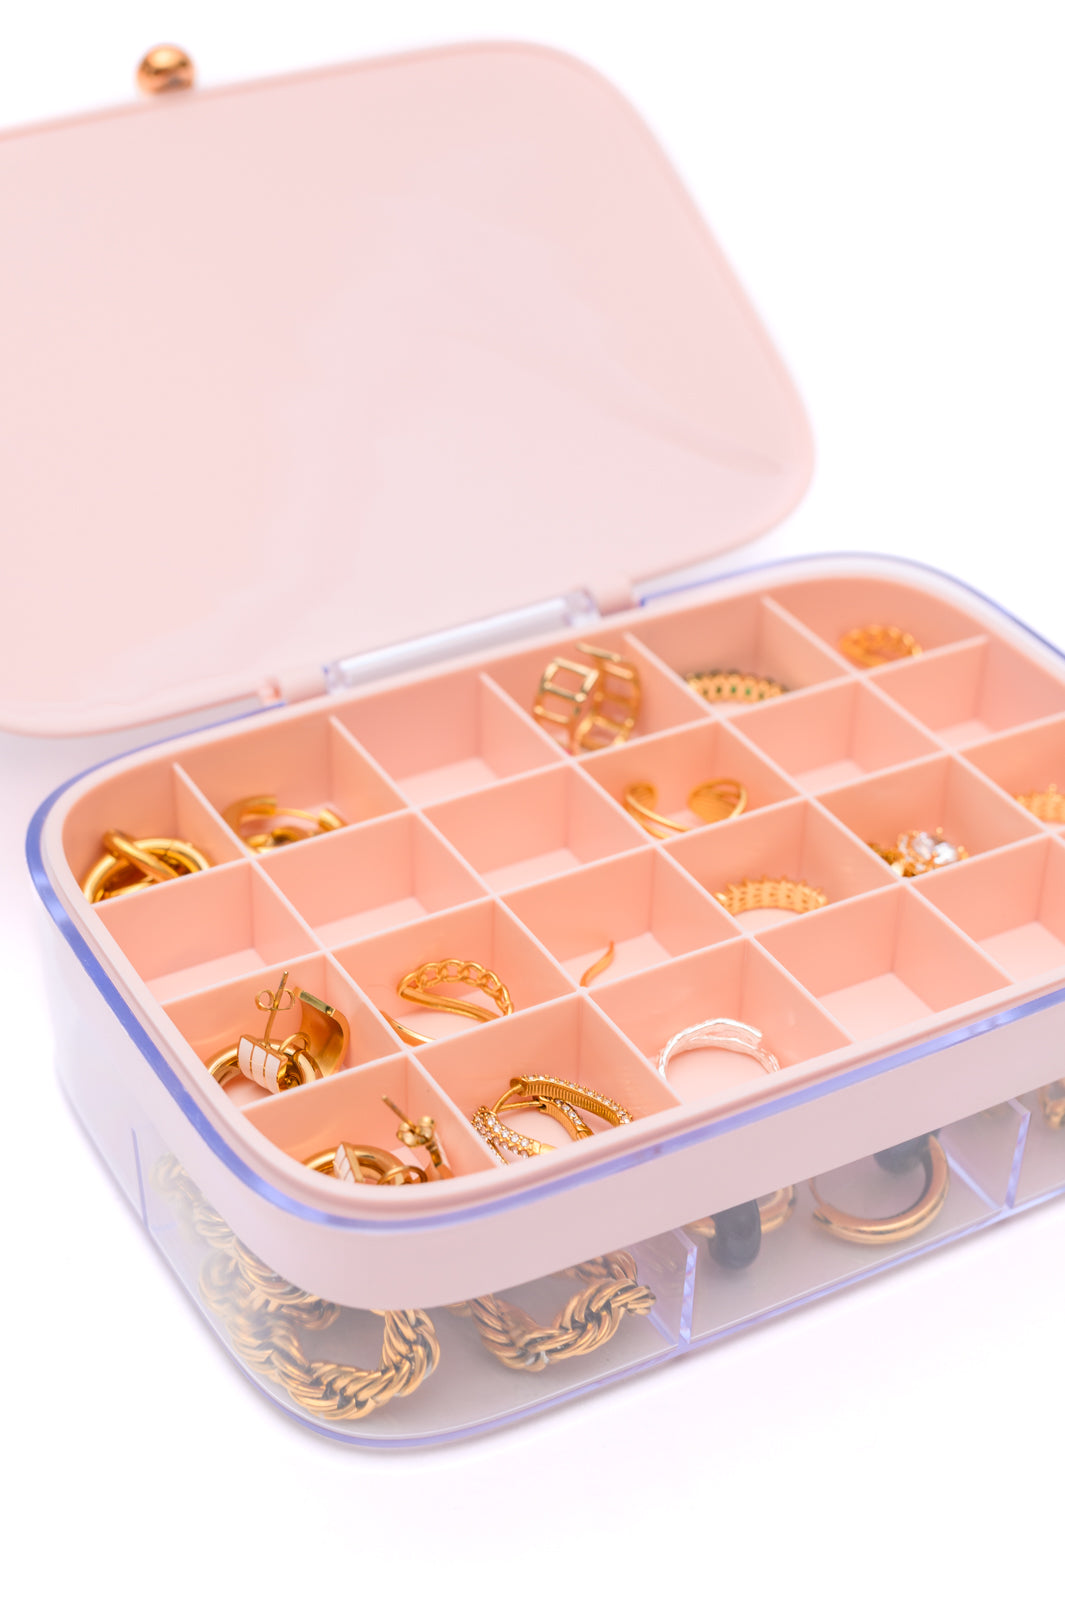 All Sorted Out Jewelry Storage Case in Pink Ave Shops